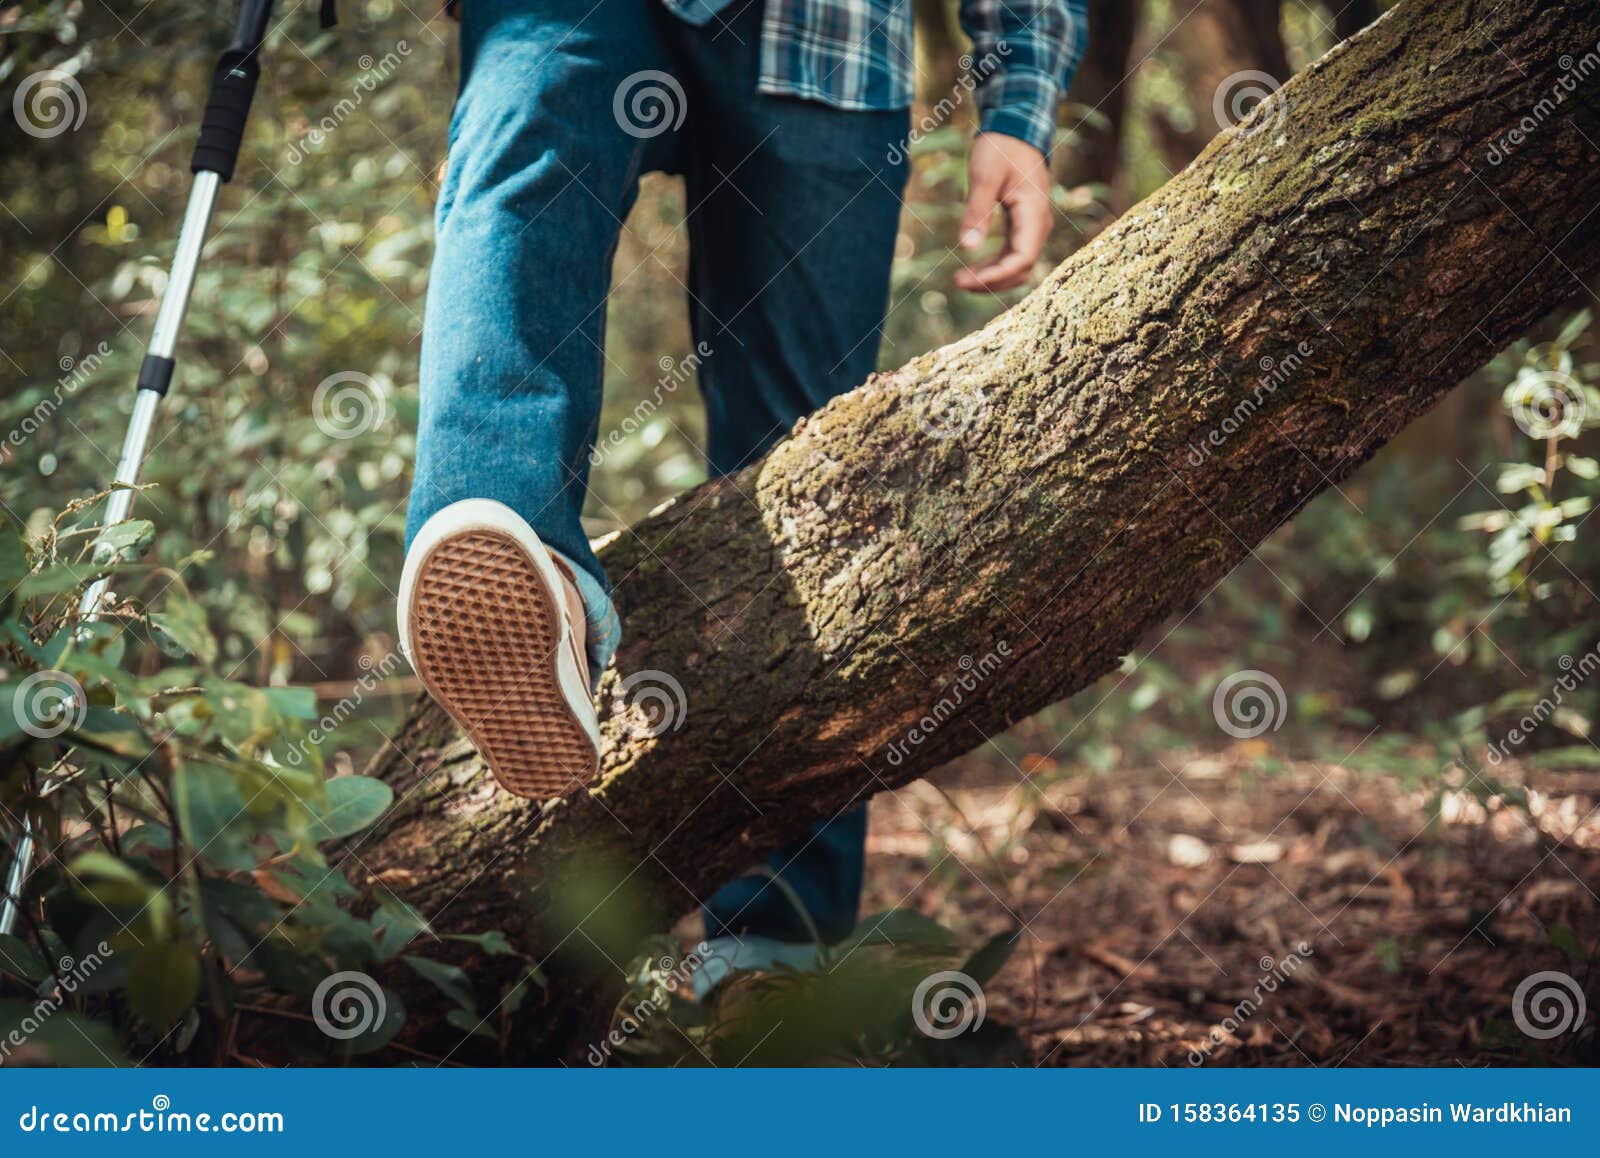 woman walking on a log in the forest and balancing: physical exercise, healthy lifestyle and harmony concept